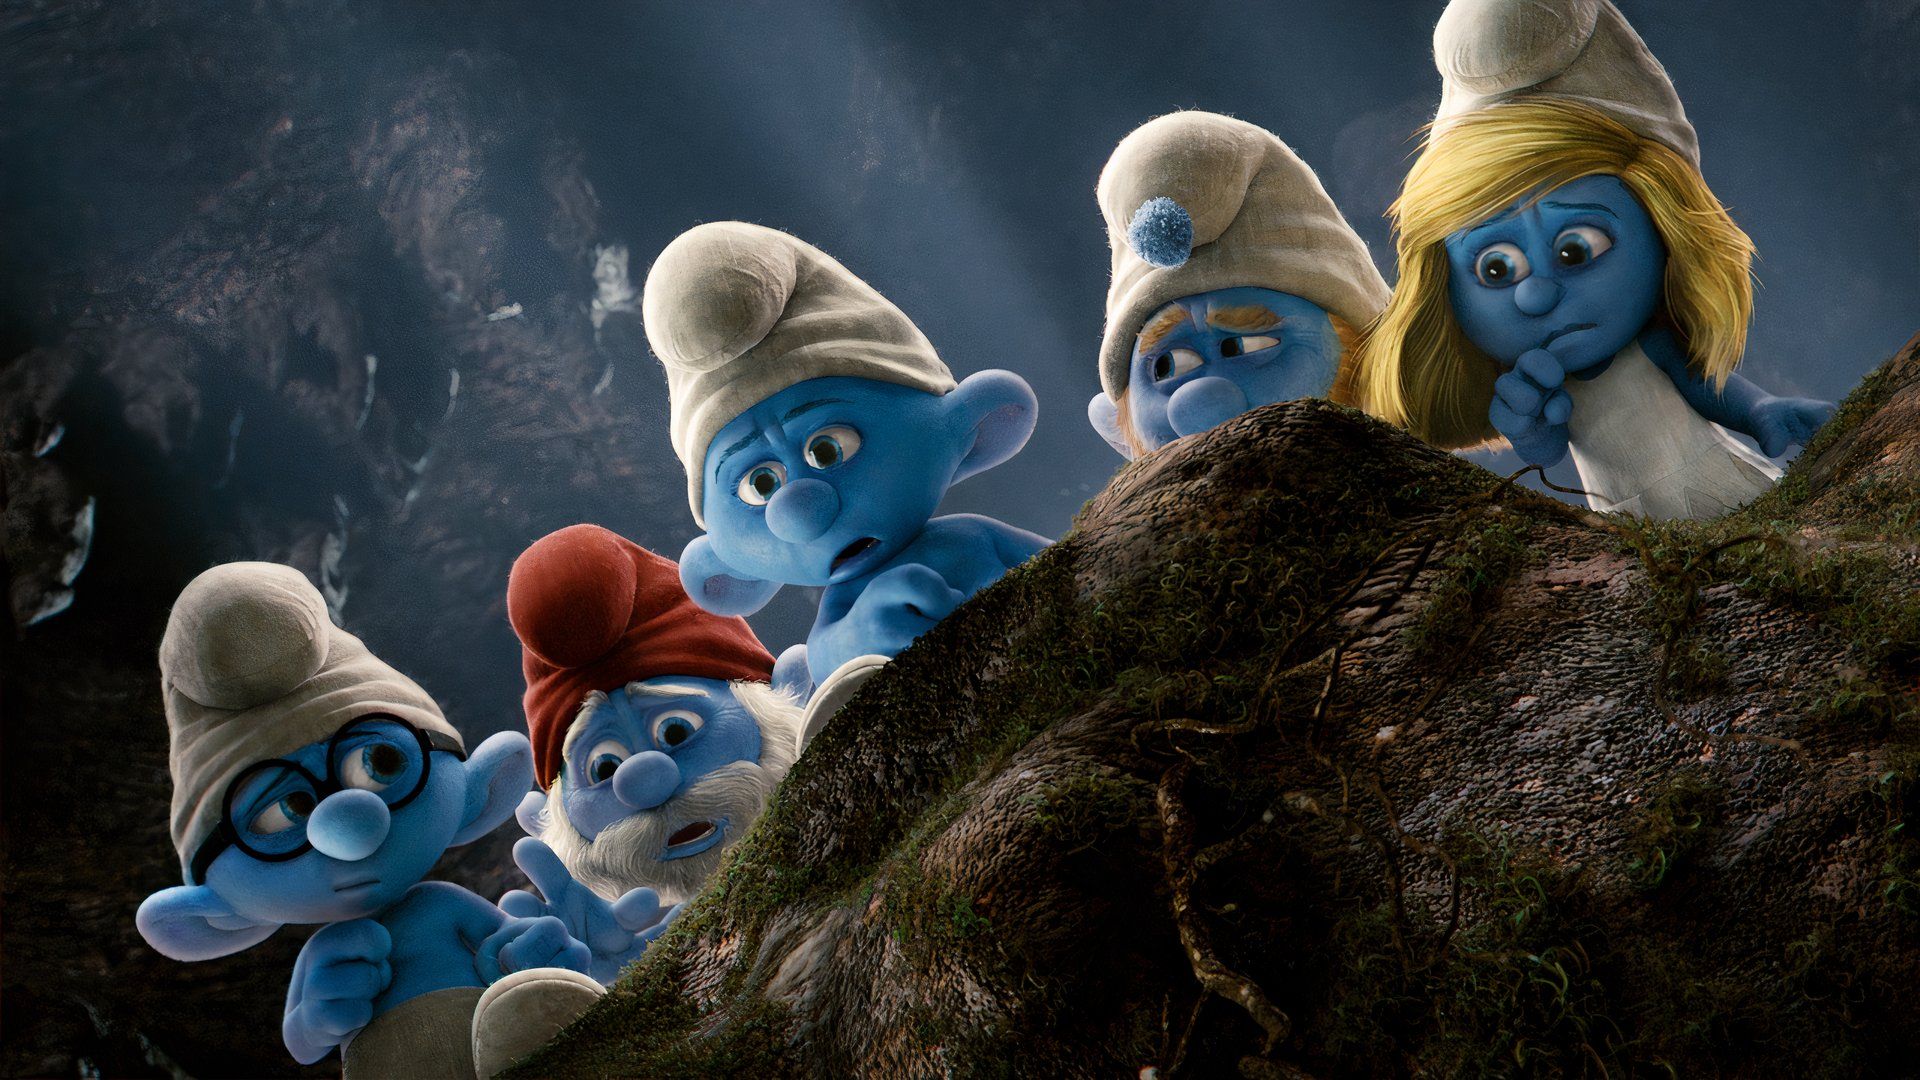 The Smurfs hide behind a log in The Smurfs